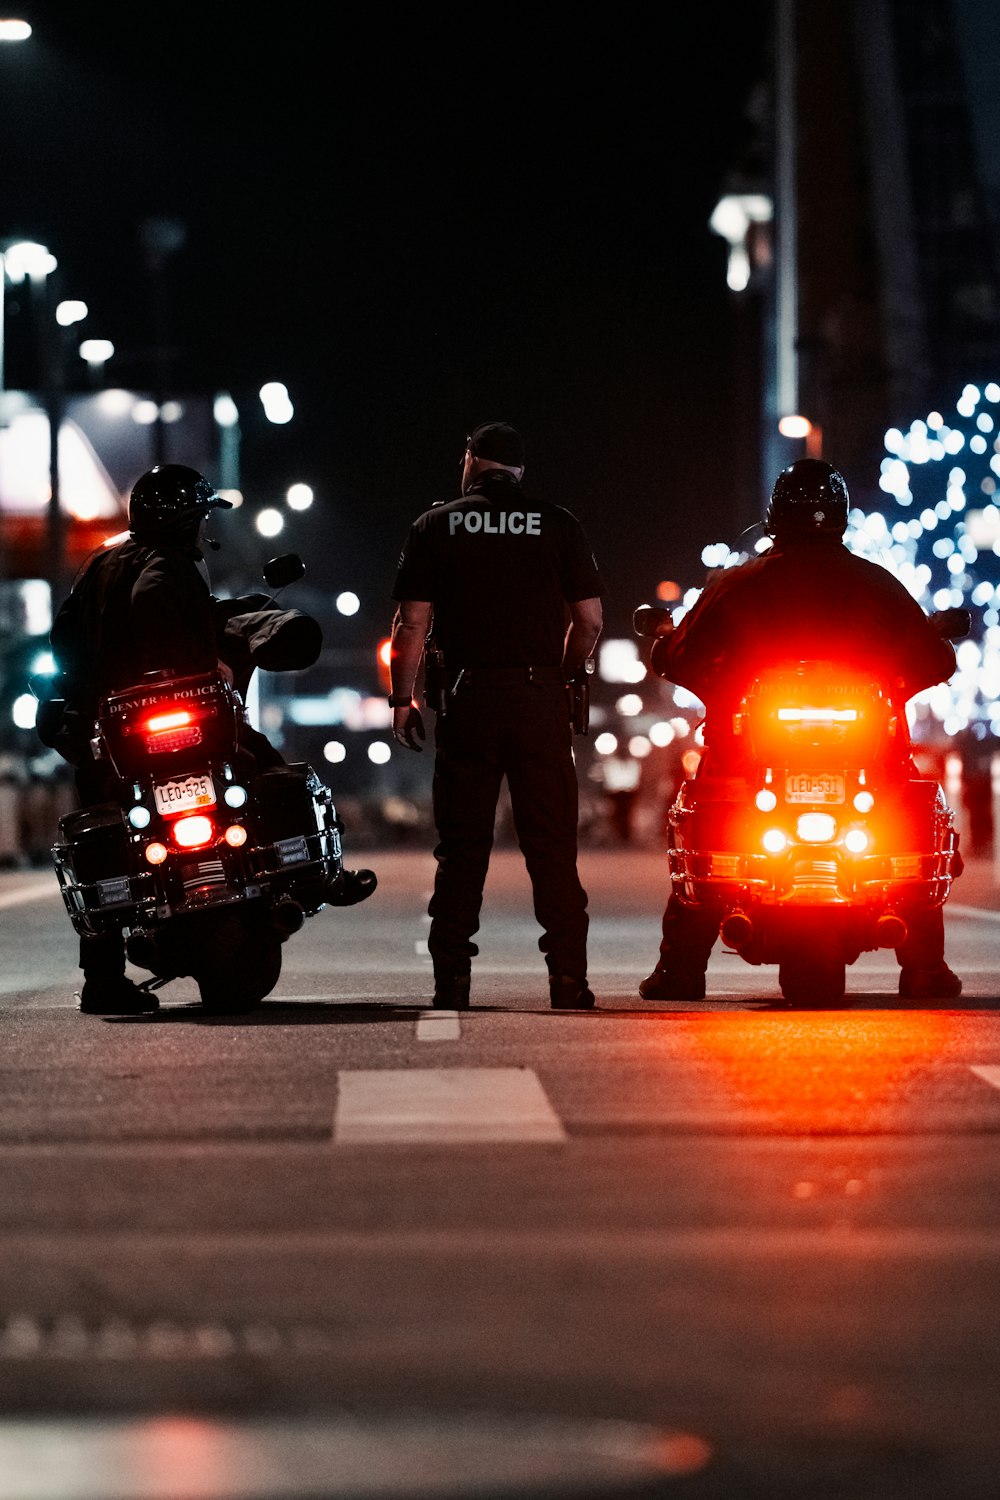 a police officer standing next to a motorcycle